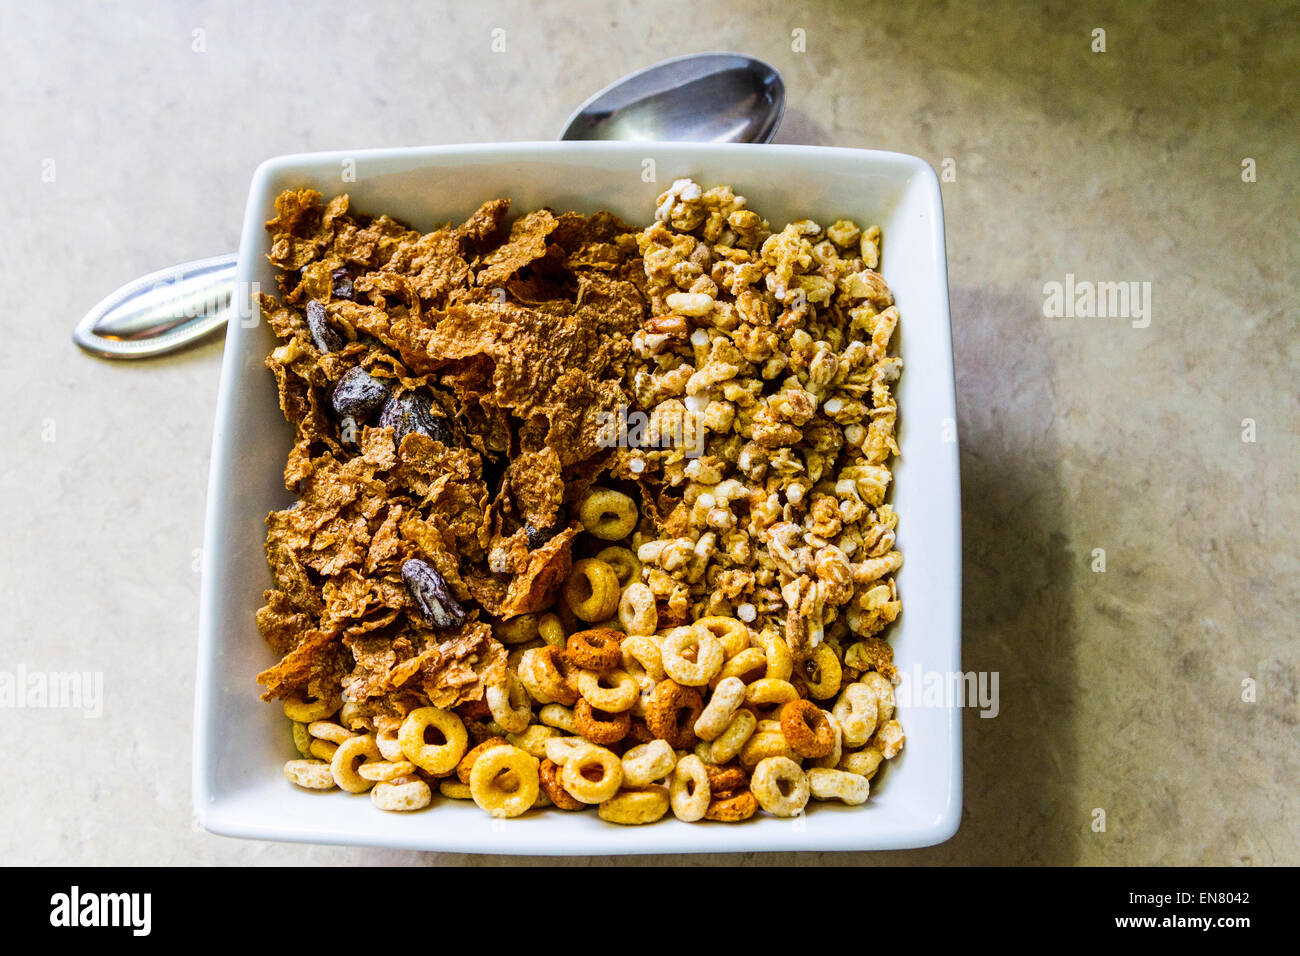 Cheerio's, Kashi Go Lean Crunch, and store brand raisin bran cereals in a square bowl for breakfast. Stock Photo